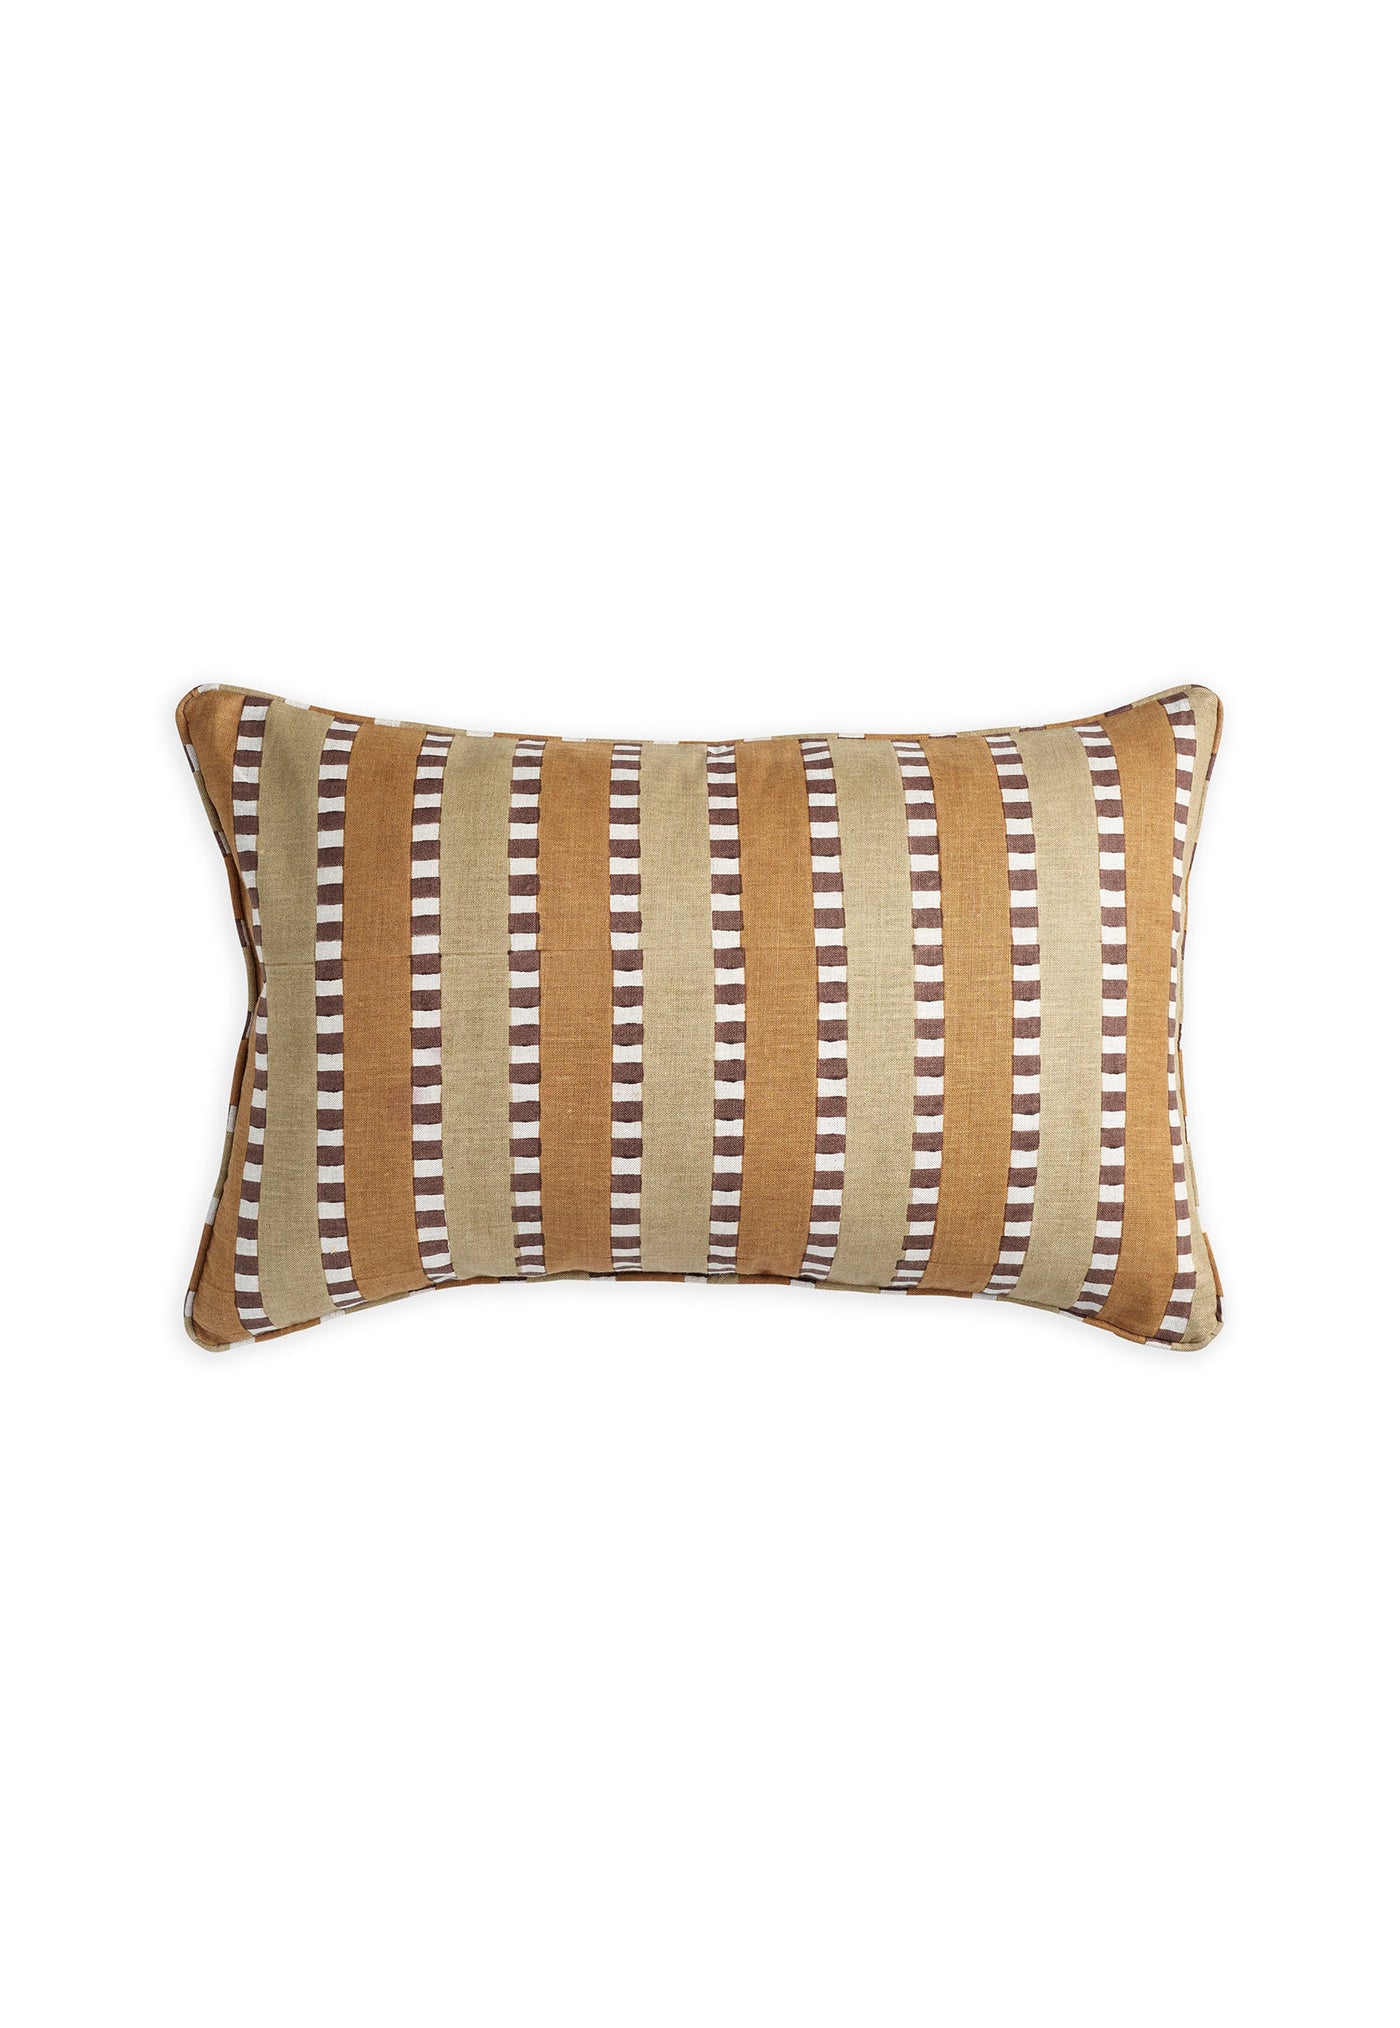 Marrakesh Toffee Linen Cushion 35x55 sold by Angel Divine